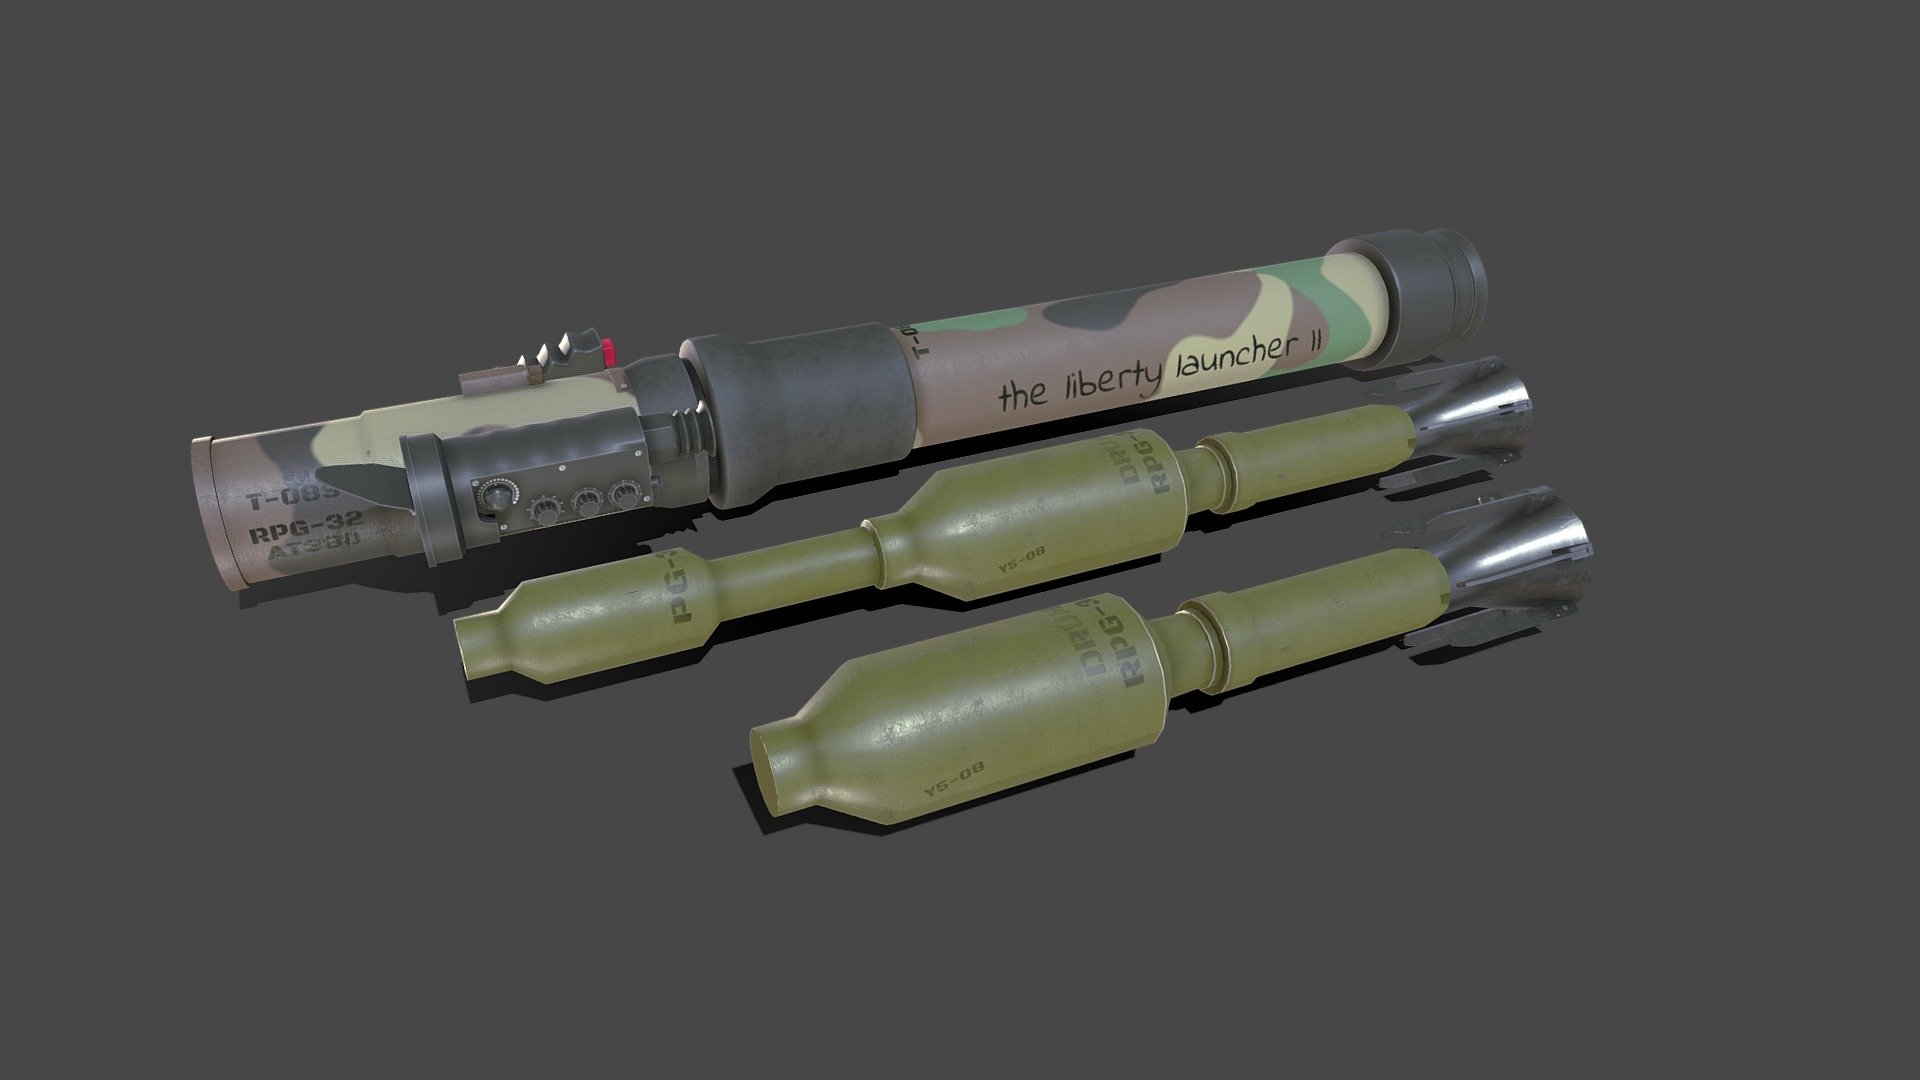 RPG-32 Anti-tank Rocket Launcher



Created in 3ds MAX 2018 no plugins used.

Low-poly (12,742 Tris) ready to use in games, AR/VR.

Textures are in PNG format 4096x4096(for RPG 32) and 2048x2048(for rocket) PBR metalness 2 set textures.

Available formats: MAX 2018 and 2015, OBJ, MTL, FBX, .tbscene.

Files unit: Centimeters.

If you need any other file format you can always request it.

All formats include materials and textures.

check the collection click here - RPG-32 Anti-tank Rocket Launcher - Buy Royalty Free 3D model by MaX3Dd 3d model